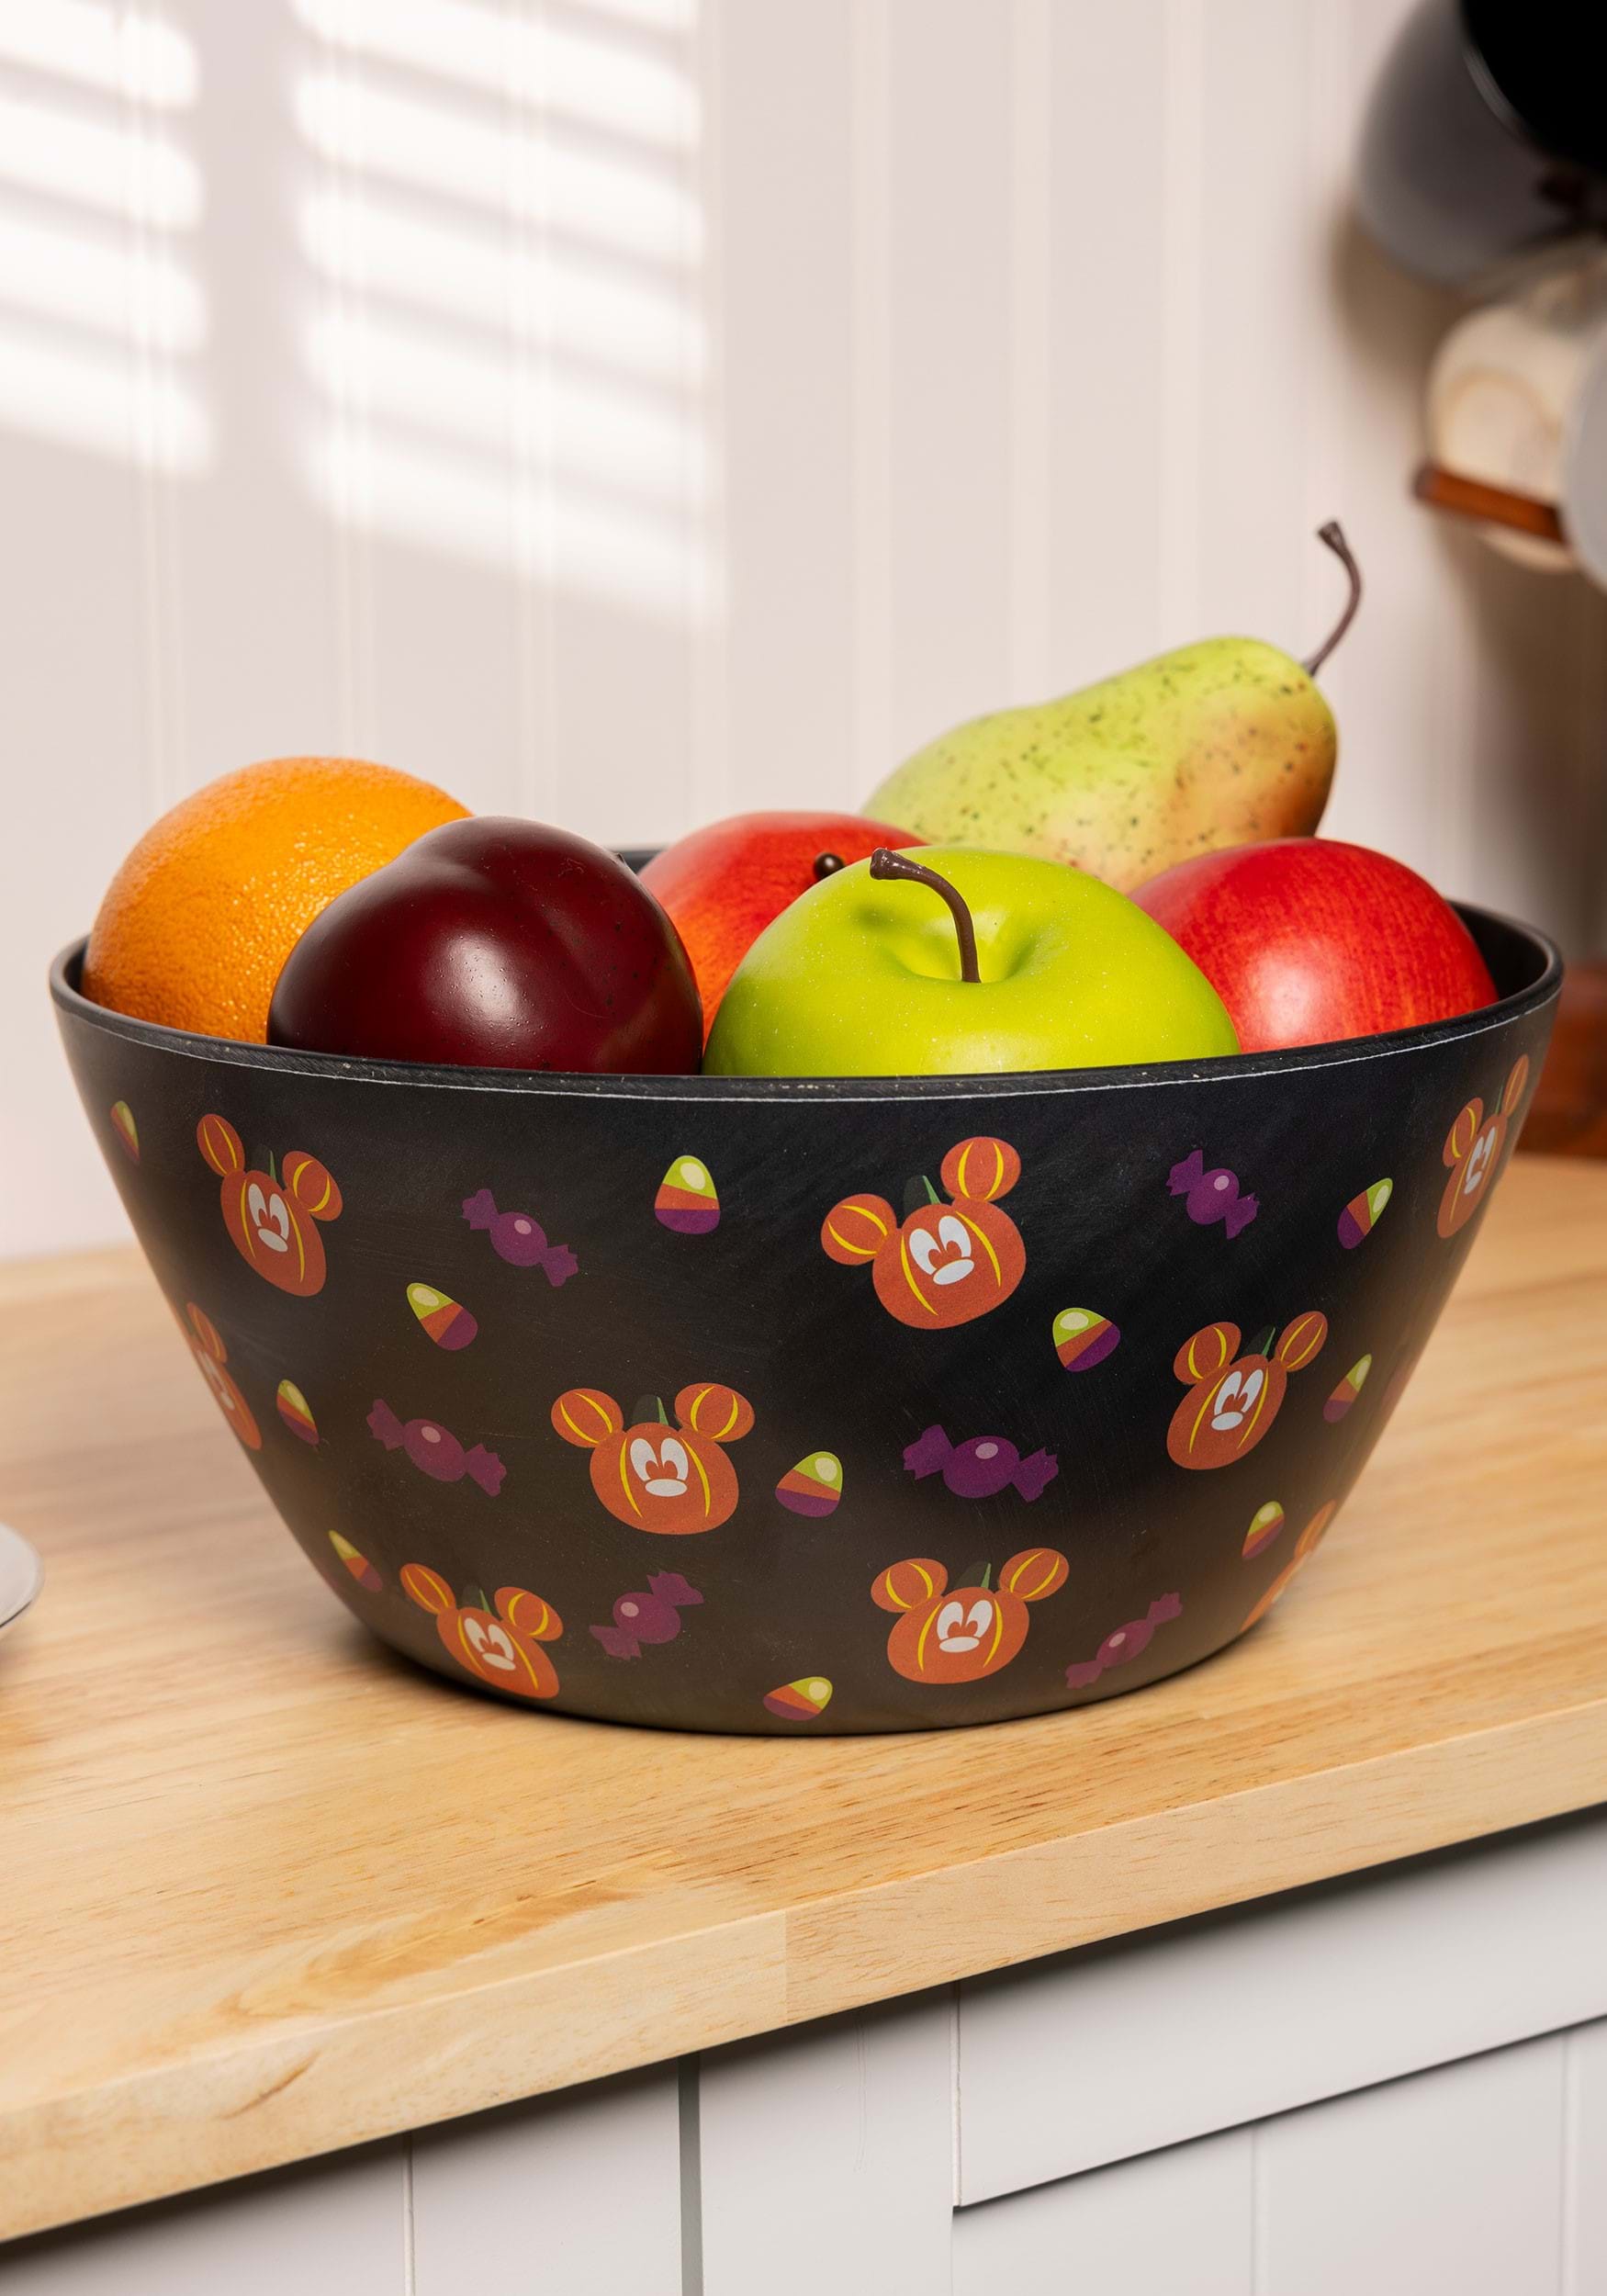 https://images.halloween.com/products/88720/1-1/dis-mickey-tossed-pumpkin-black-bamboo-salad-bowl.jpg